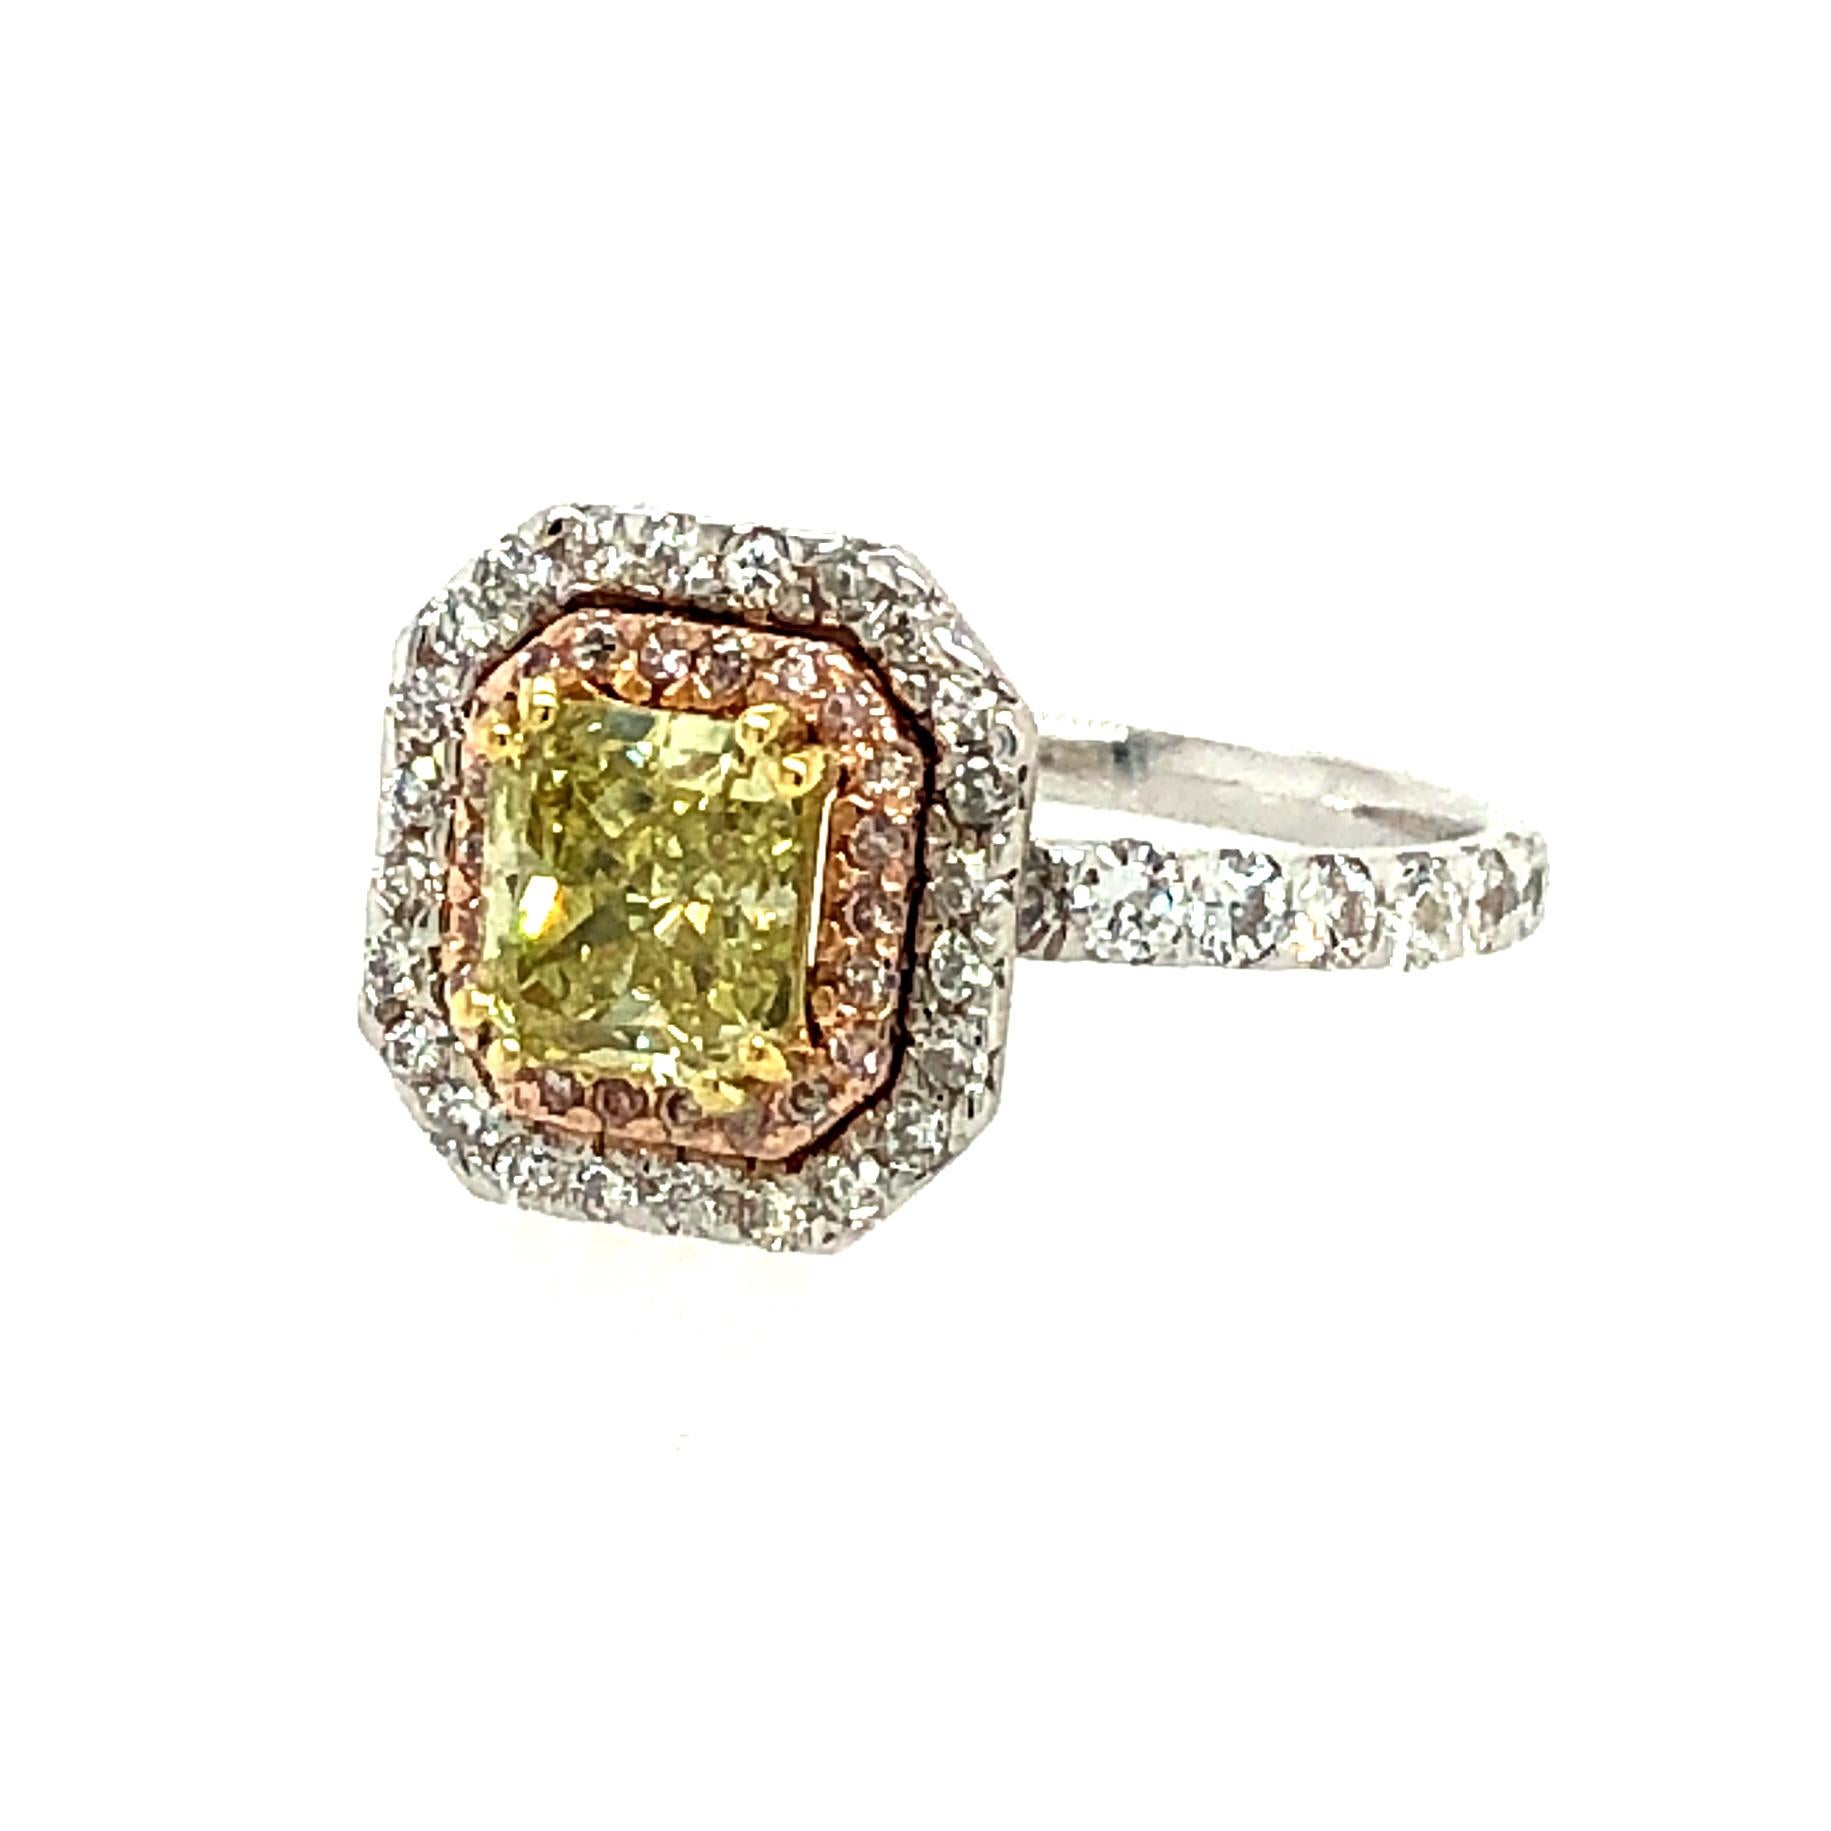 Radiant Cut 1.85 Carat Radiant GIA Cert Fancy Intense Yellow and Pink Diamond Ring 18kt Gold